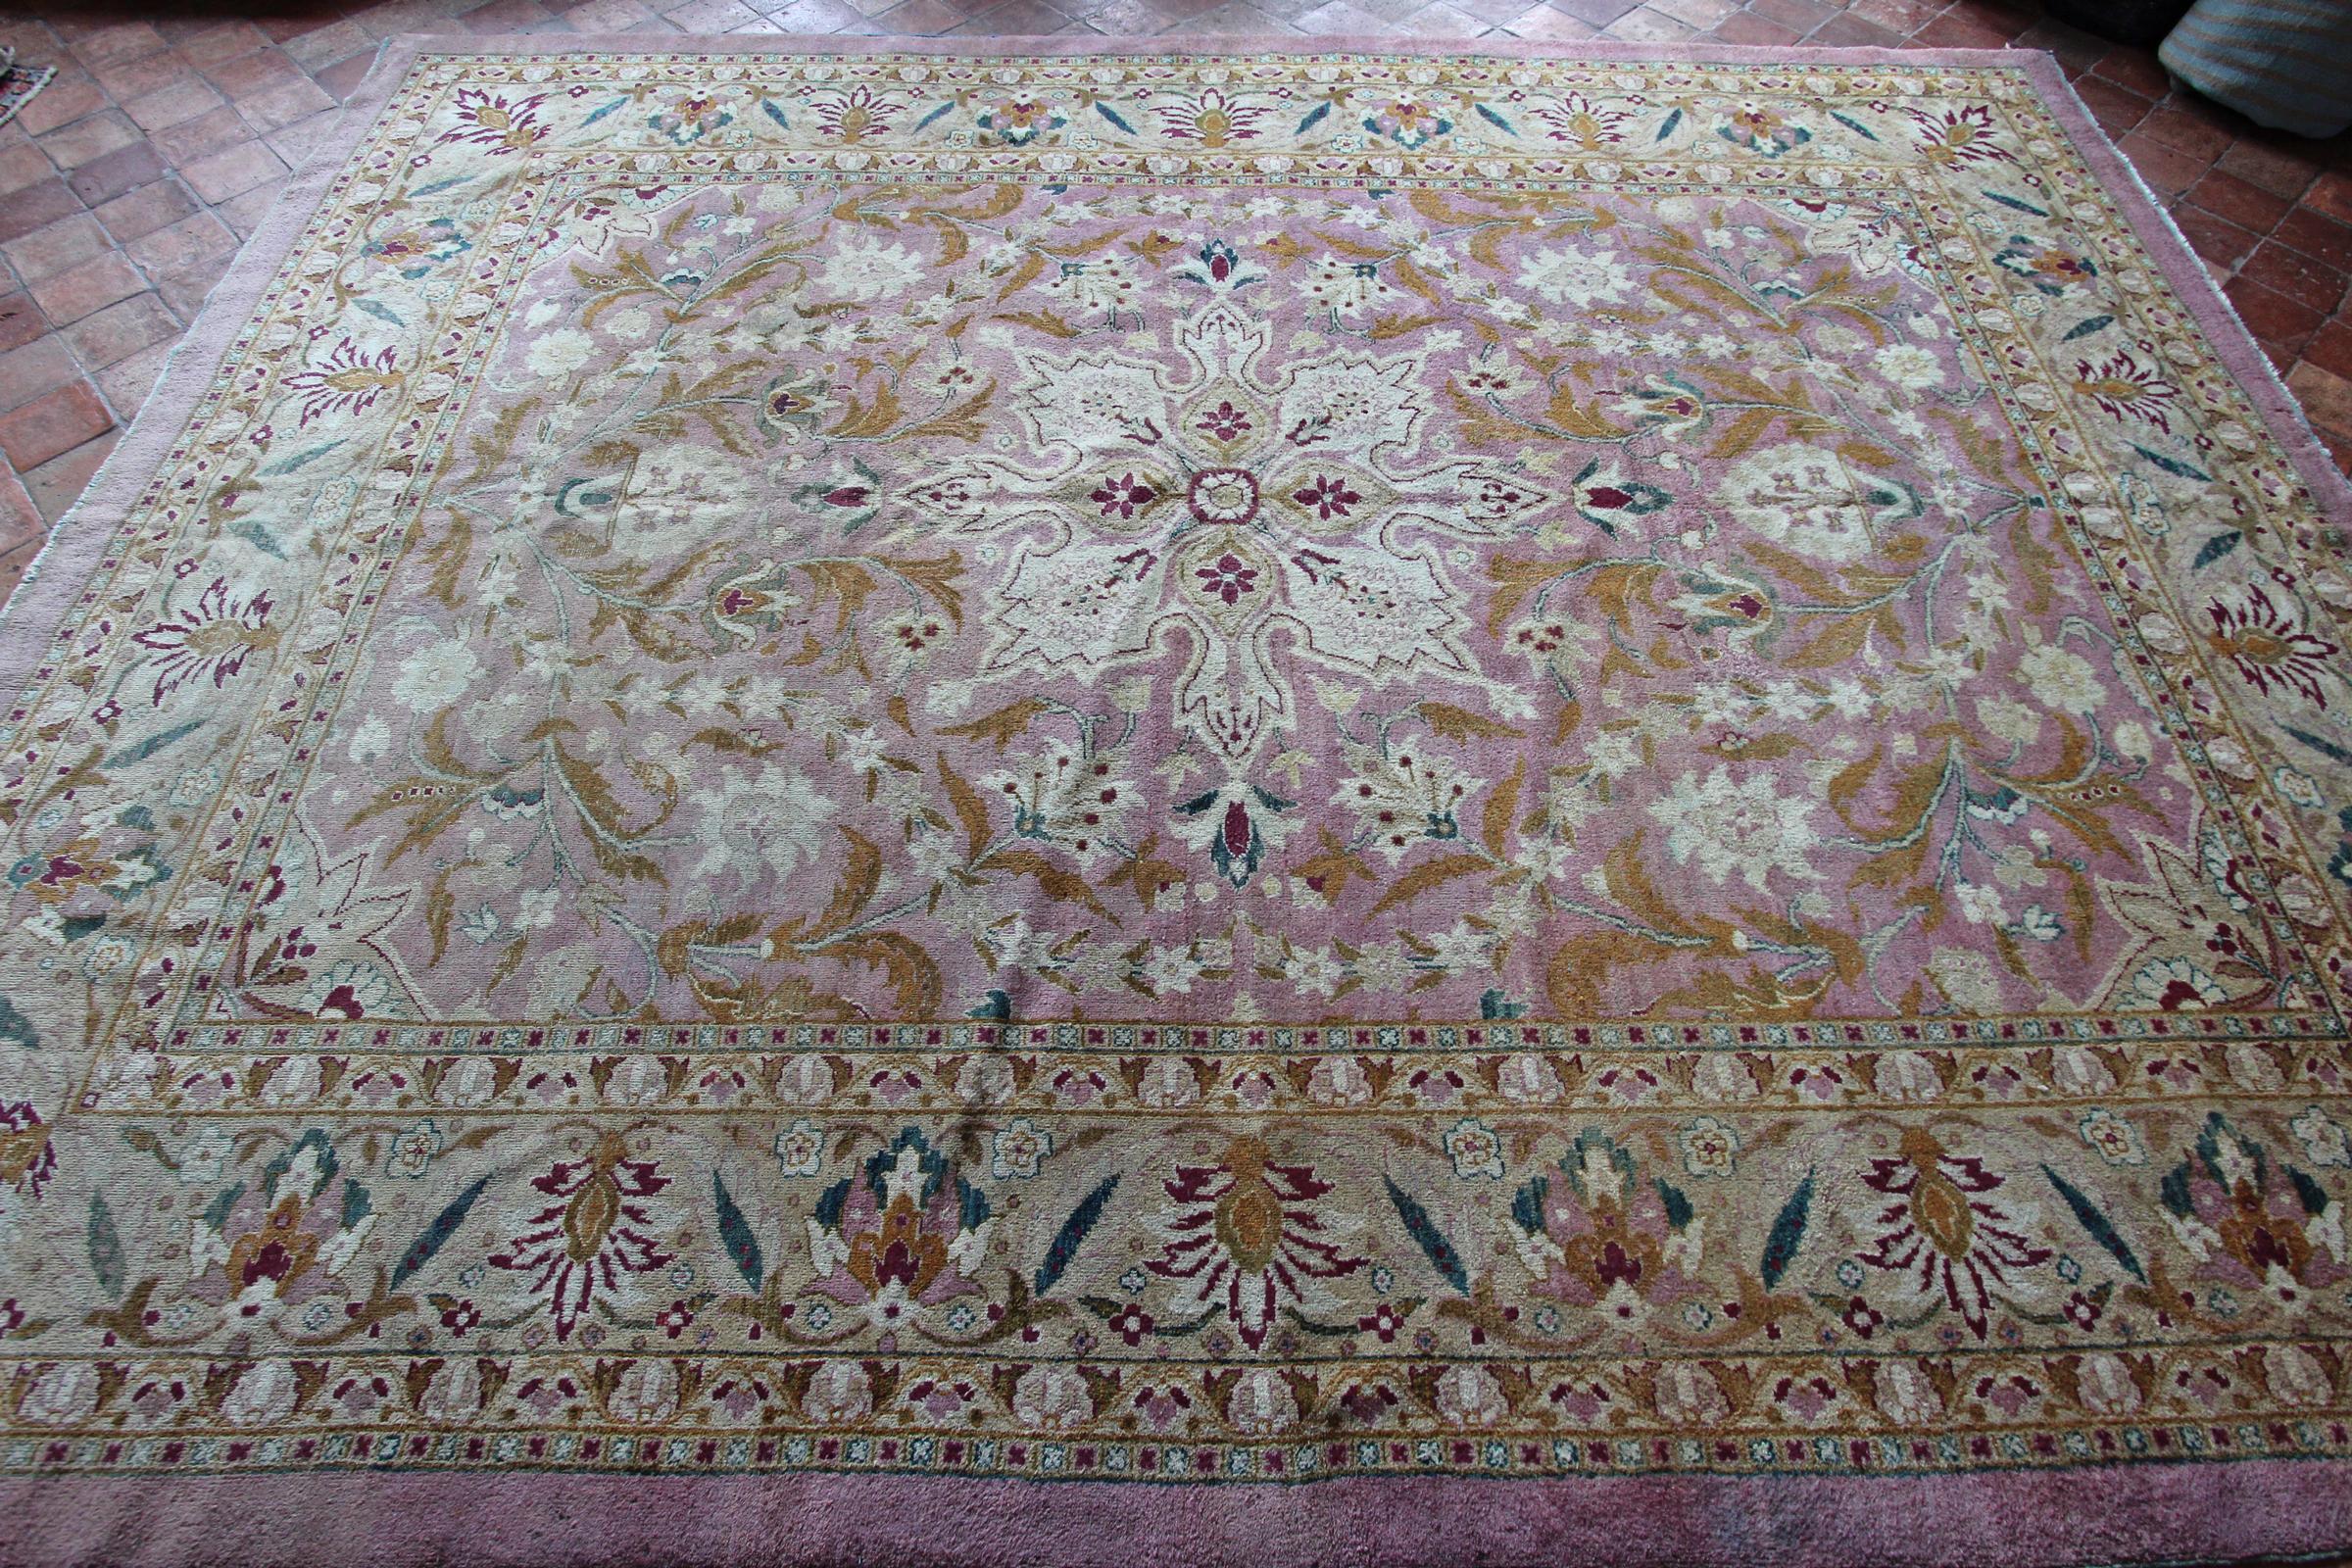 An exquisite design and elegant soft rare colors on this antique Amritsar carpet woven in the late 19th century. A subtle variety of pink dyes are used for the main field color and outer border to frame this classical medallion design. Scrolling